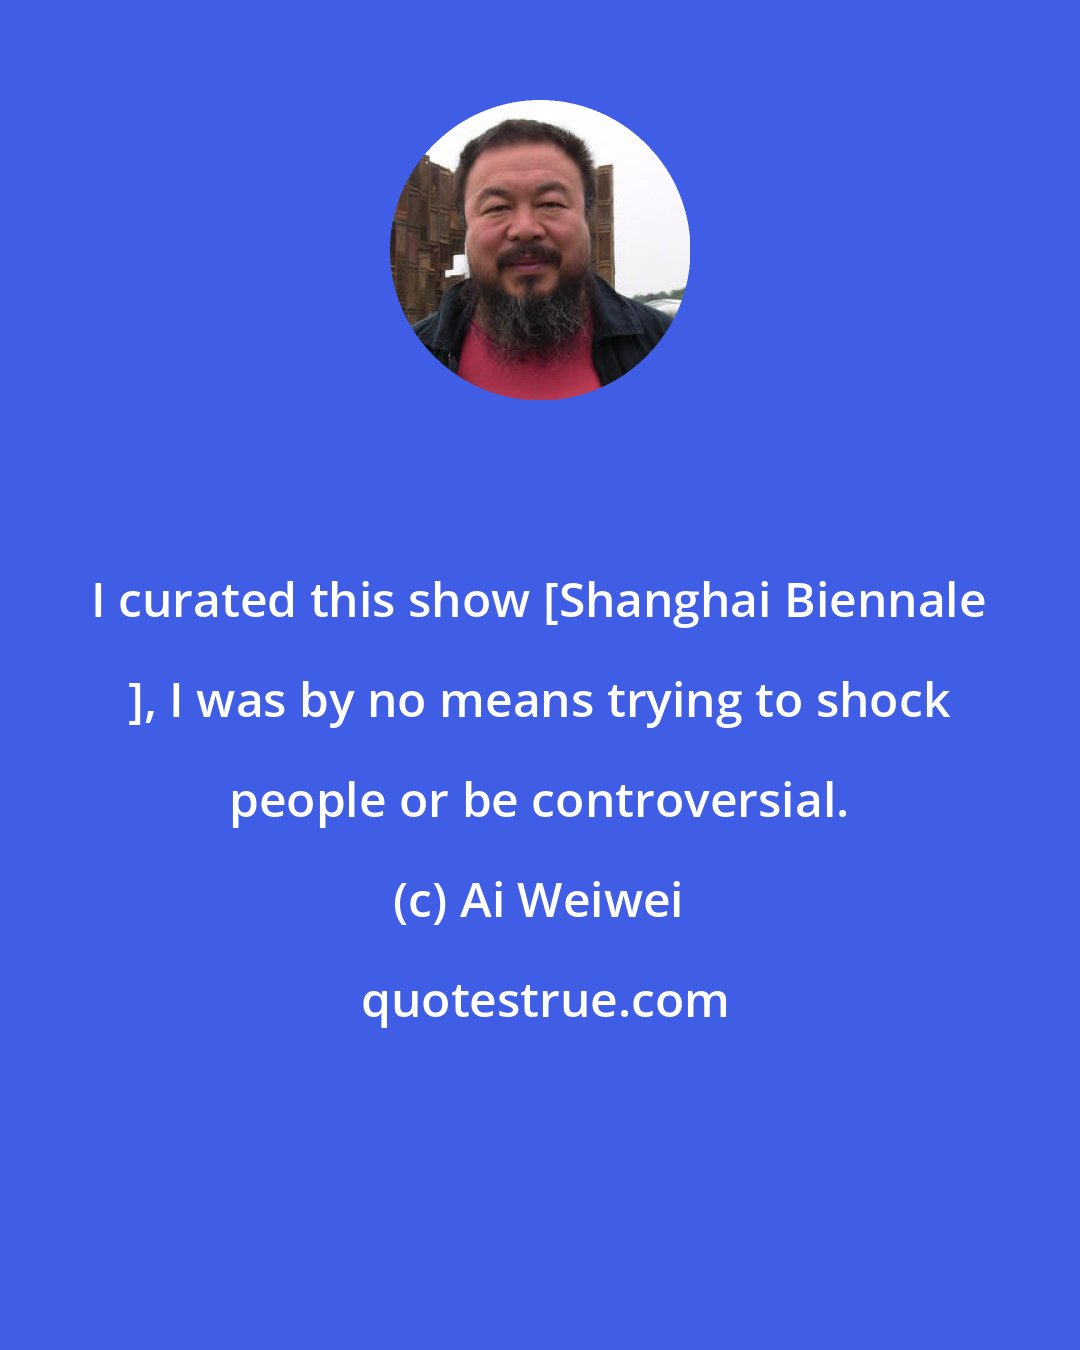 Ai Weiwei: I curated this show [Shanghai Biennale ], I was by no means trying to shock people or be controversial.